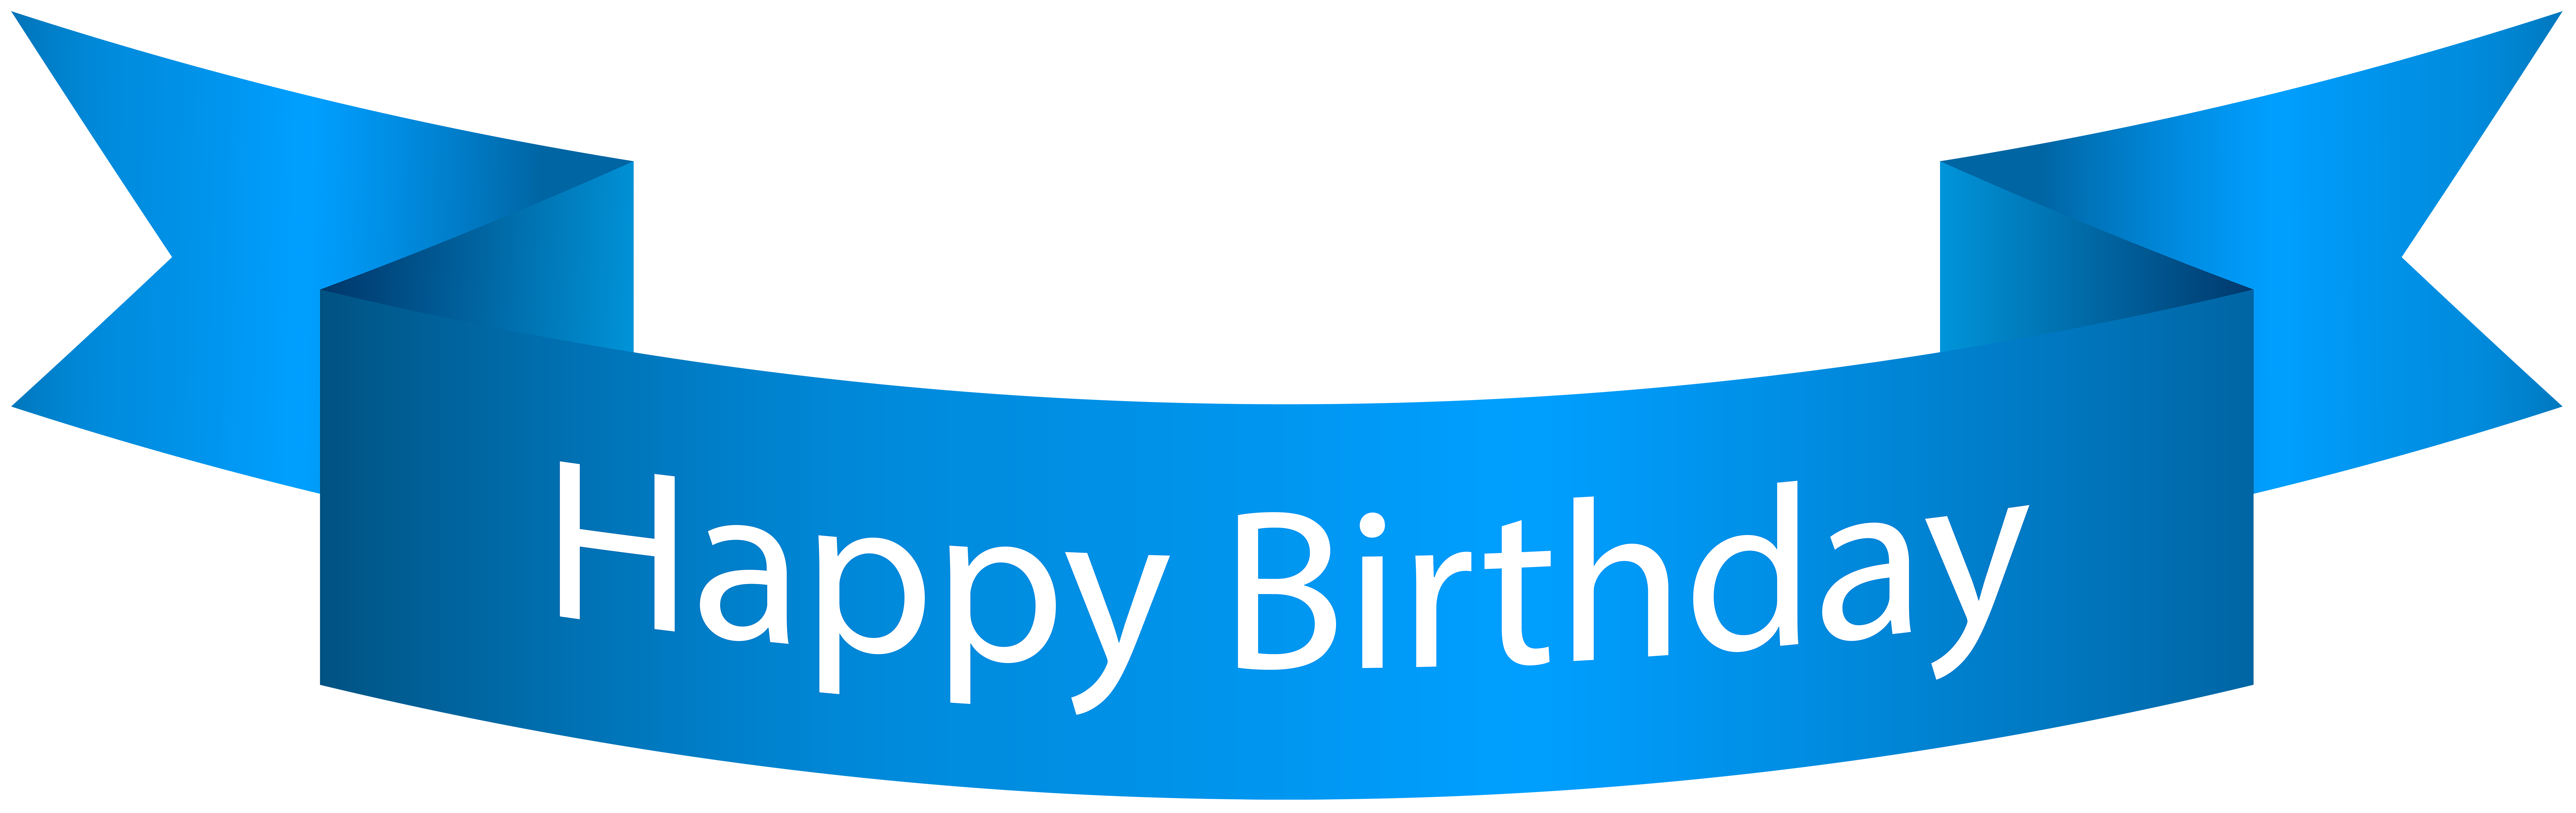 Happy Birthday Blue Banner Png Clip Art Image Gallery Yopriceville High Quality Free Images And Transparent Png Clipart